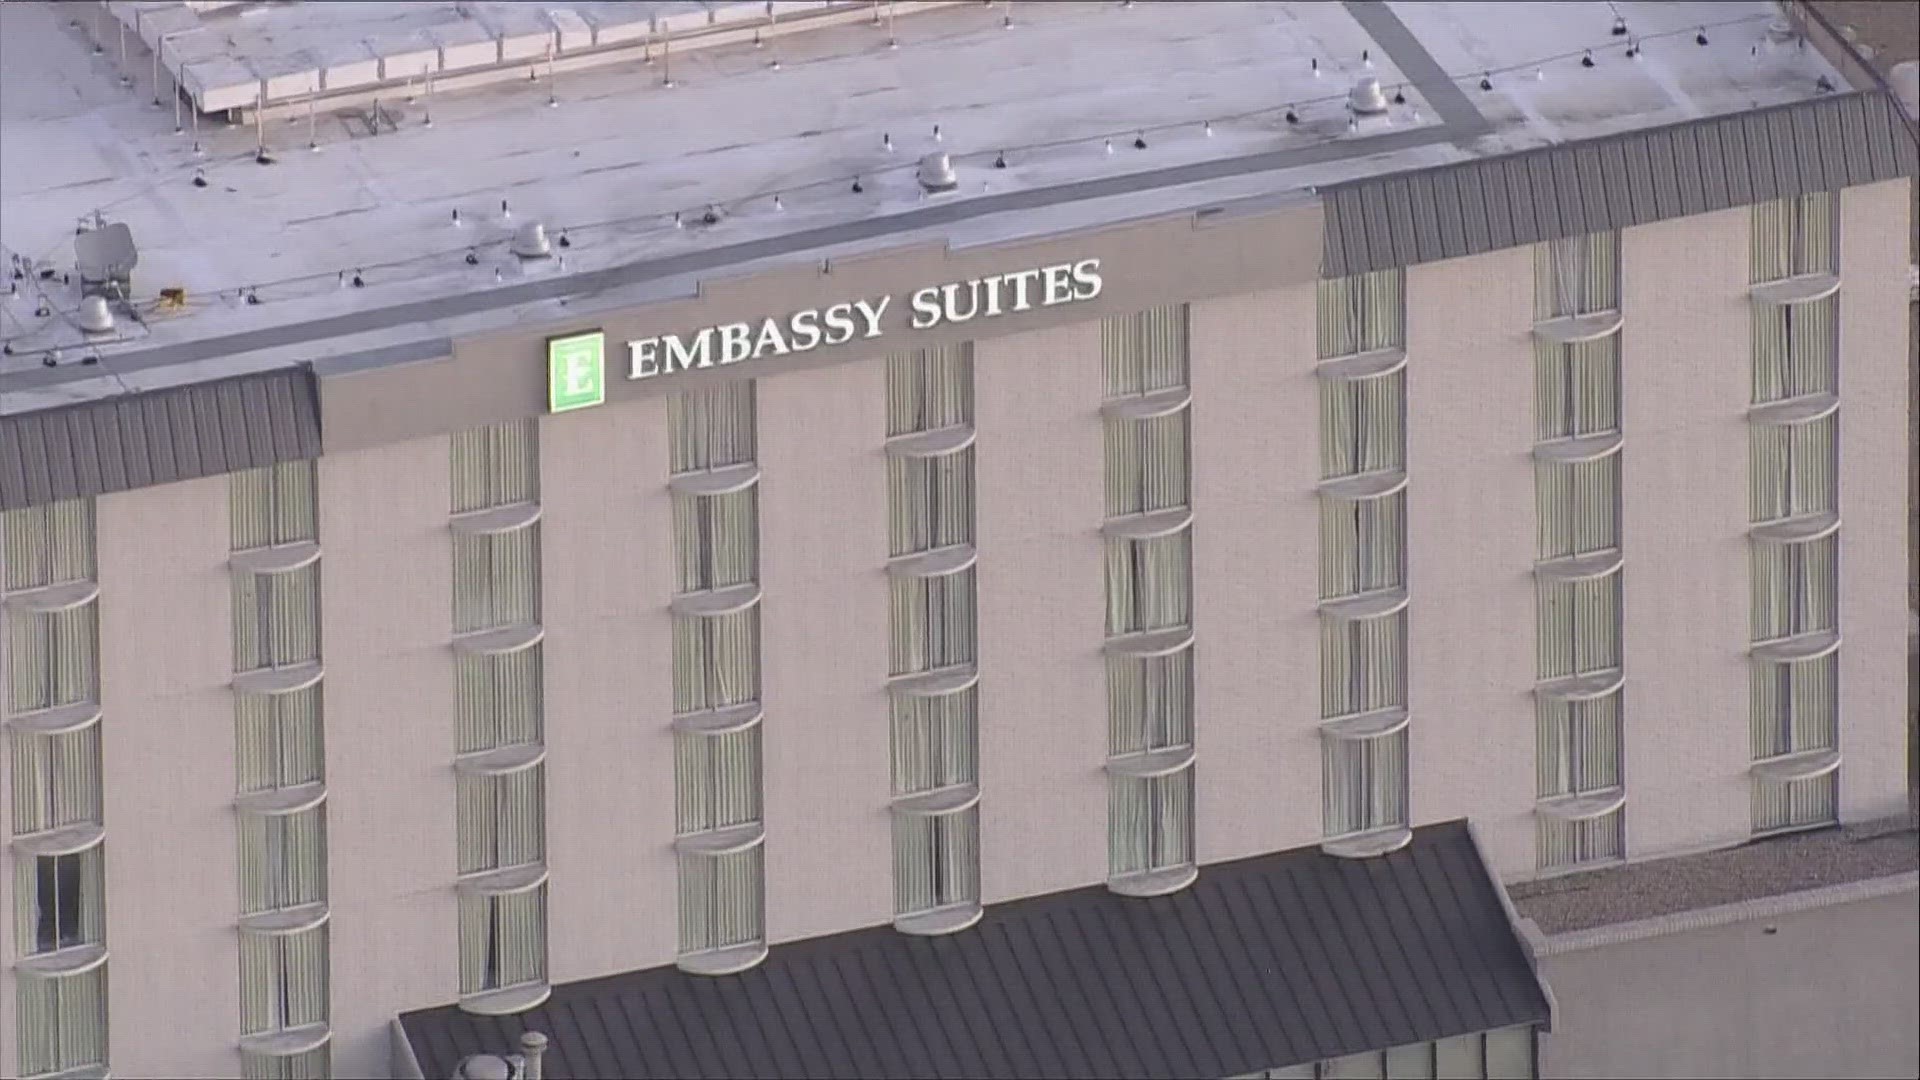 The Embassy Suites by Hilton on East Hampden Avenue is in the process of being approved to serve as housing for people experiencing homelessness.